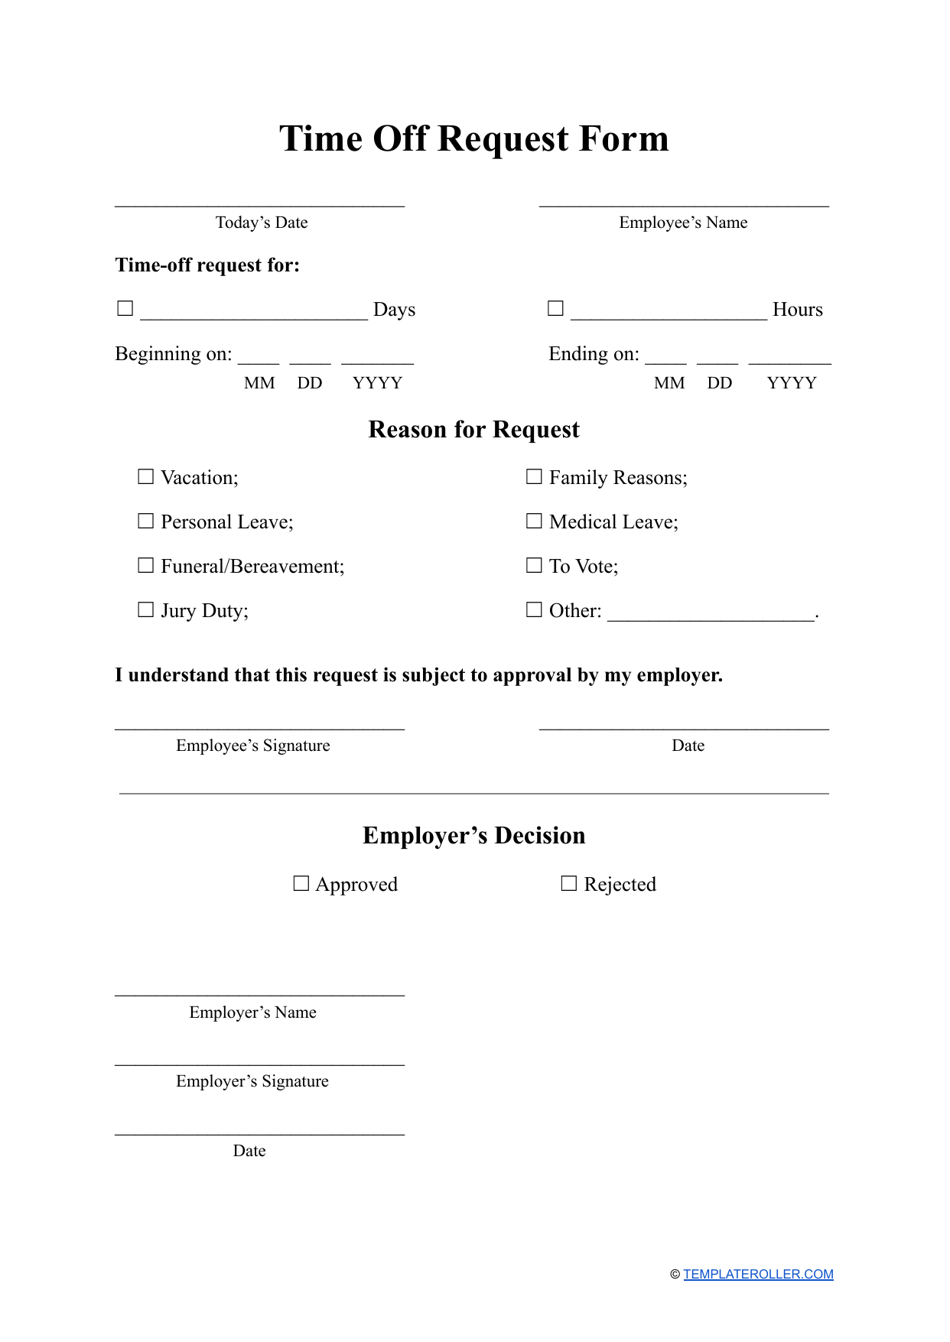 Time Off Request Form Fill Out Sign Online And Download PDF Templateroller